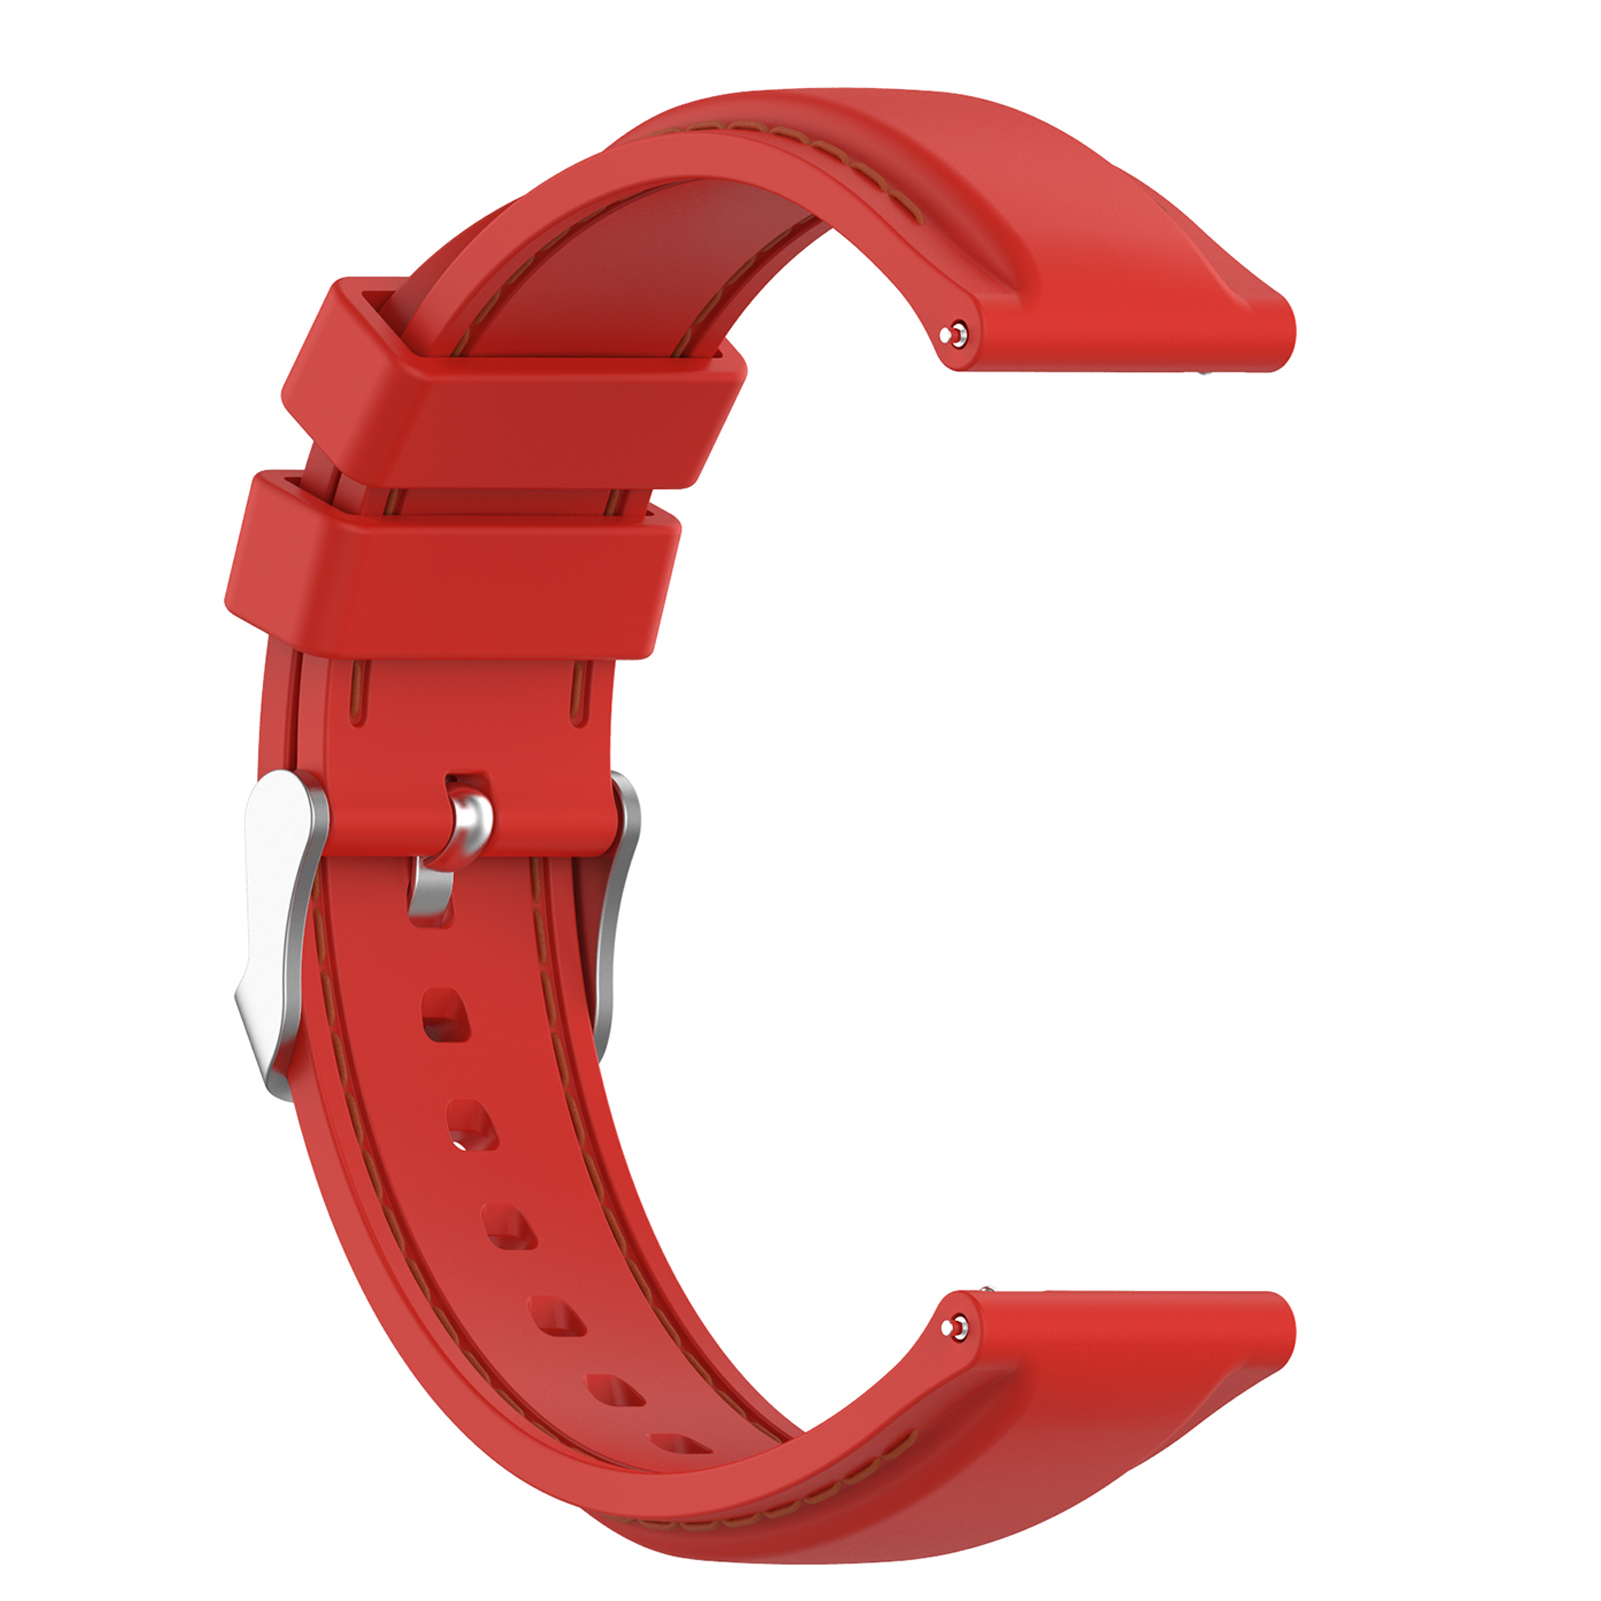 22mm-Soft-Silicone-Watch-Strap-Band-Replacement-Sport-Bracelet-Watchband-For-Ticwatch-Pro3LTE-Haylou-1809083-7